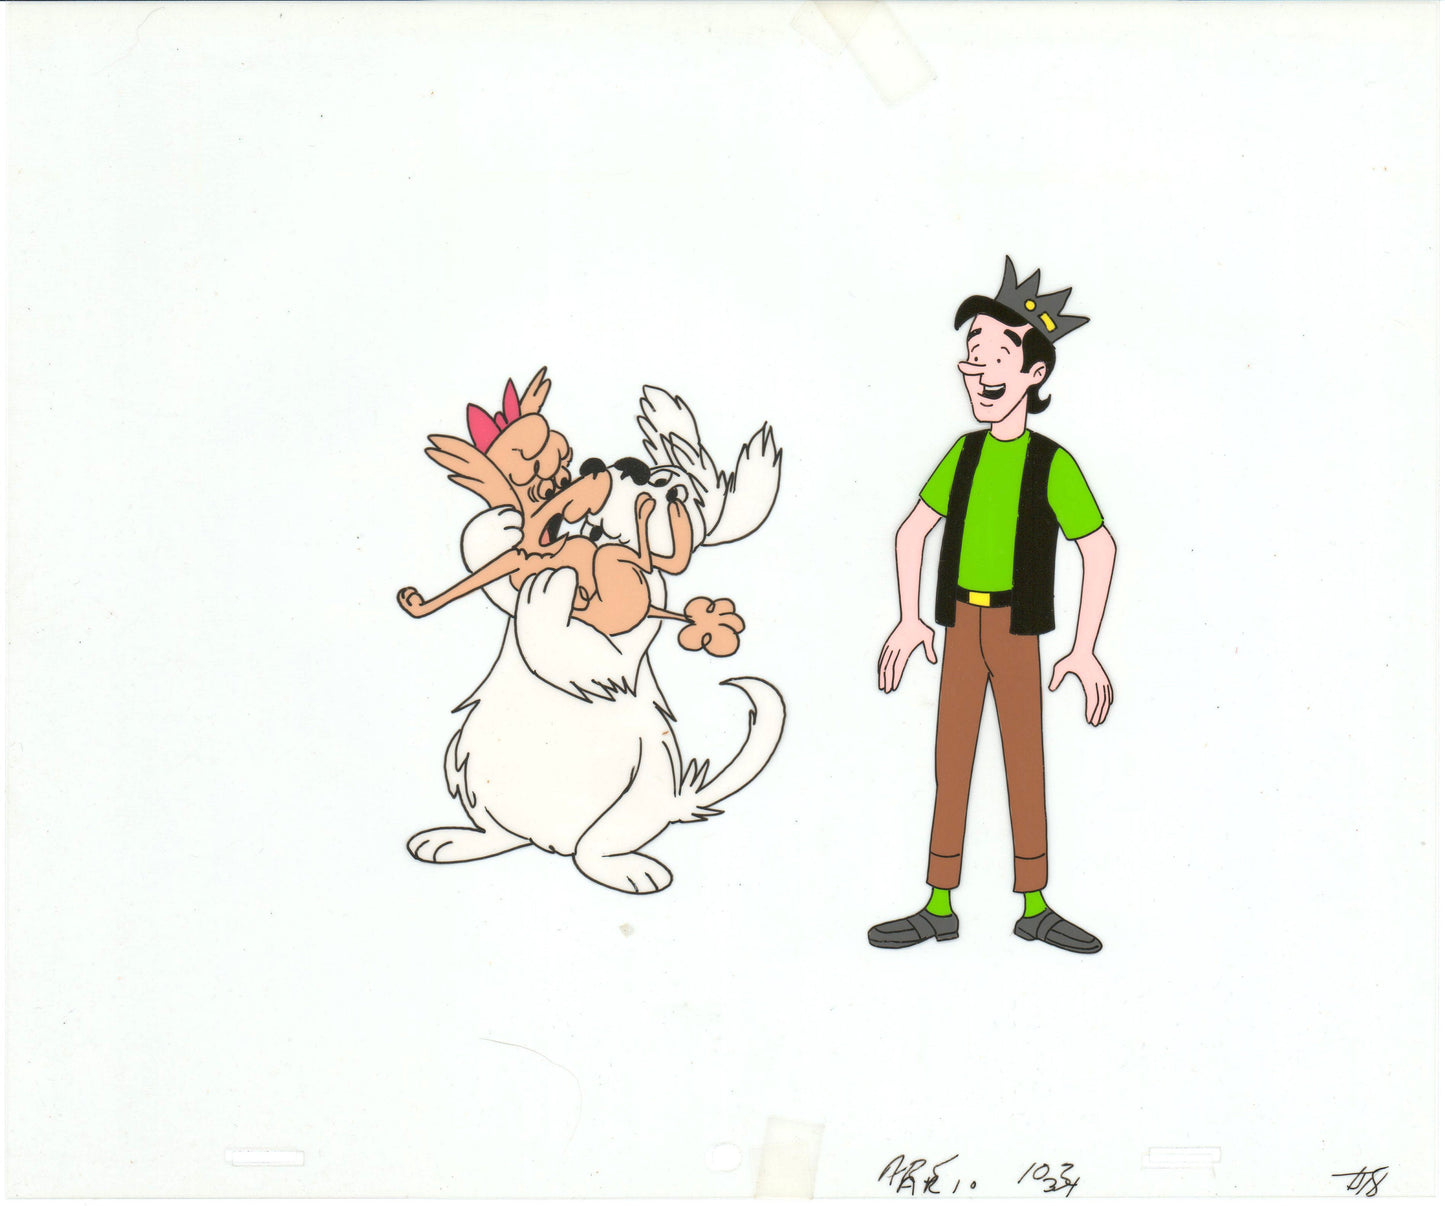 Archie Production Animation Art Cel Setup from Filmation 1968-1969 b2079